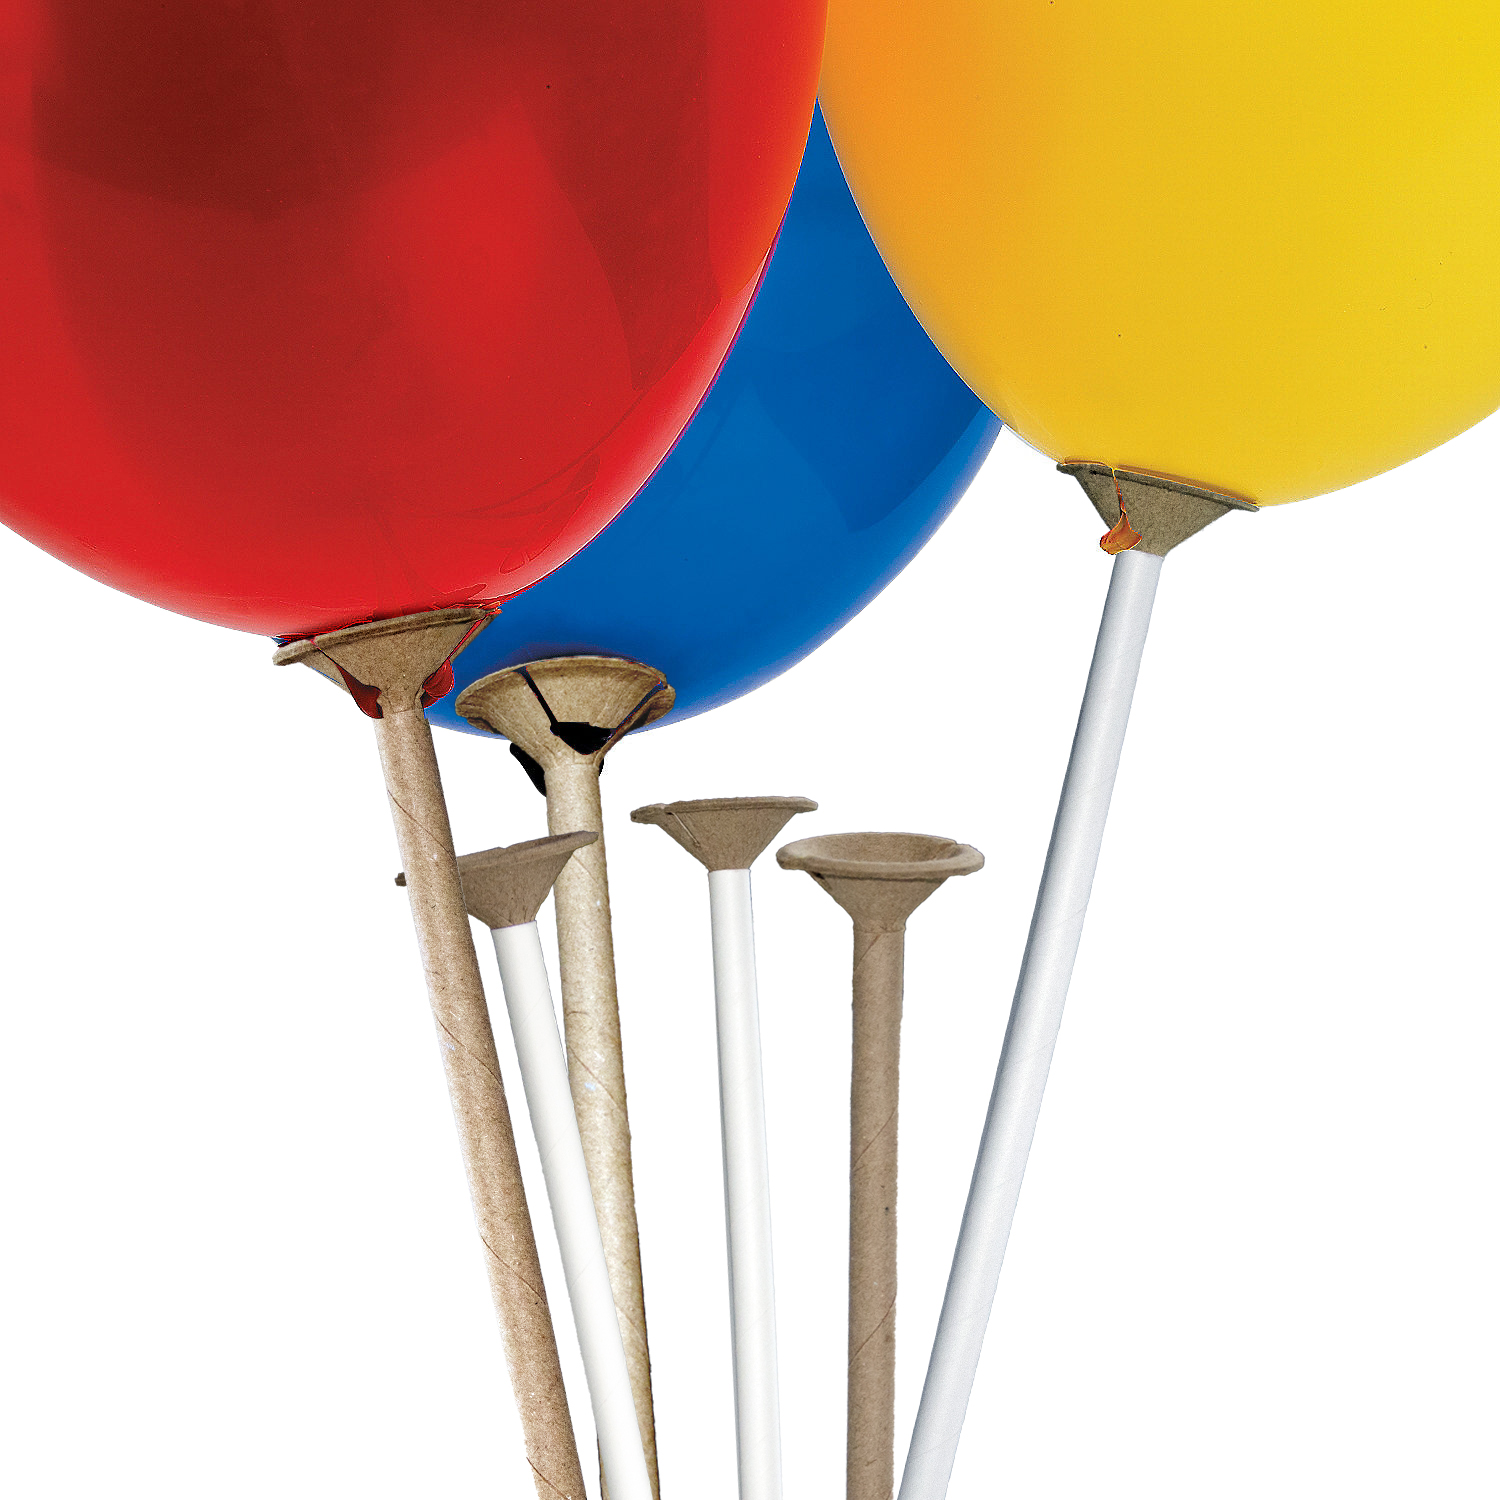 Balloon Accessories  The Very Best Balloon Accessories Manufacturer in  China